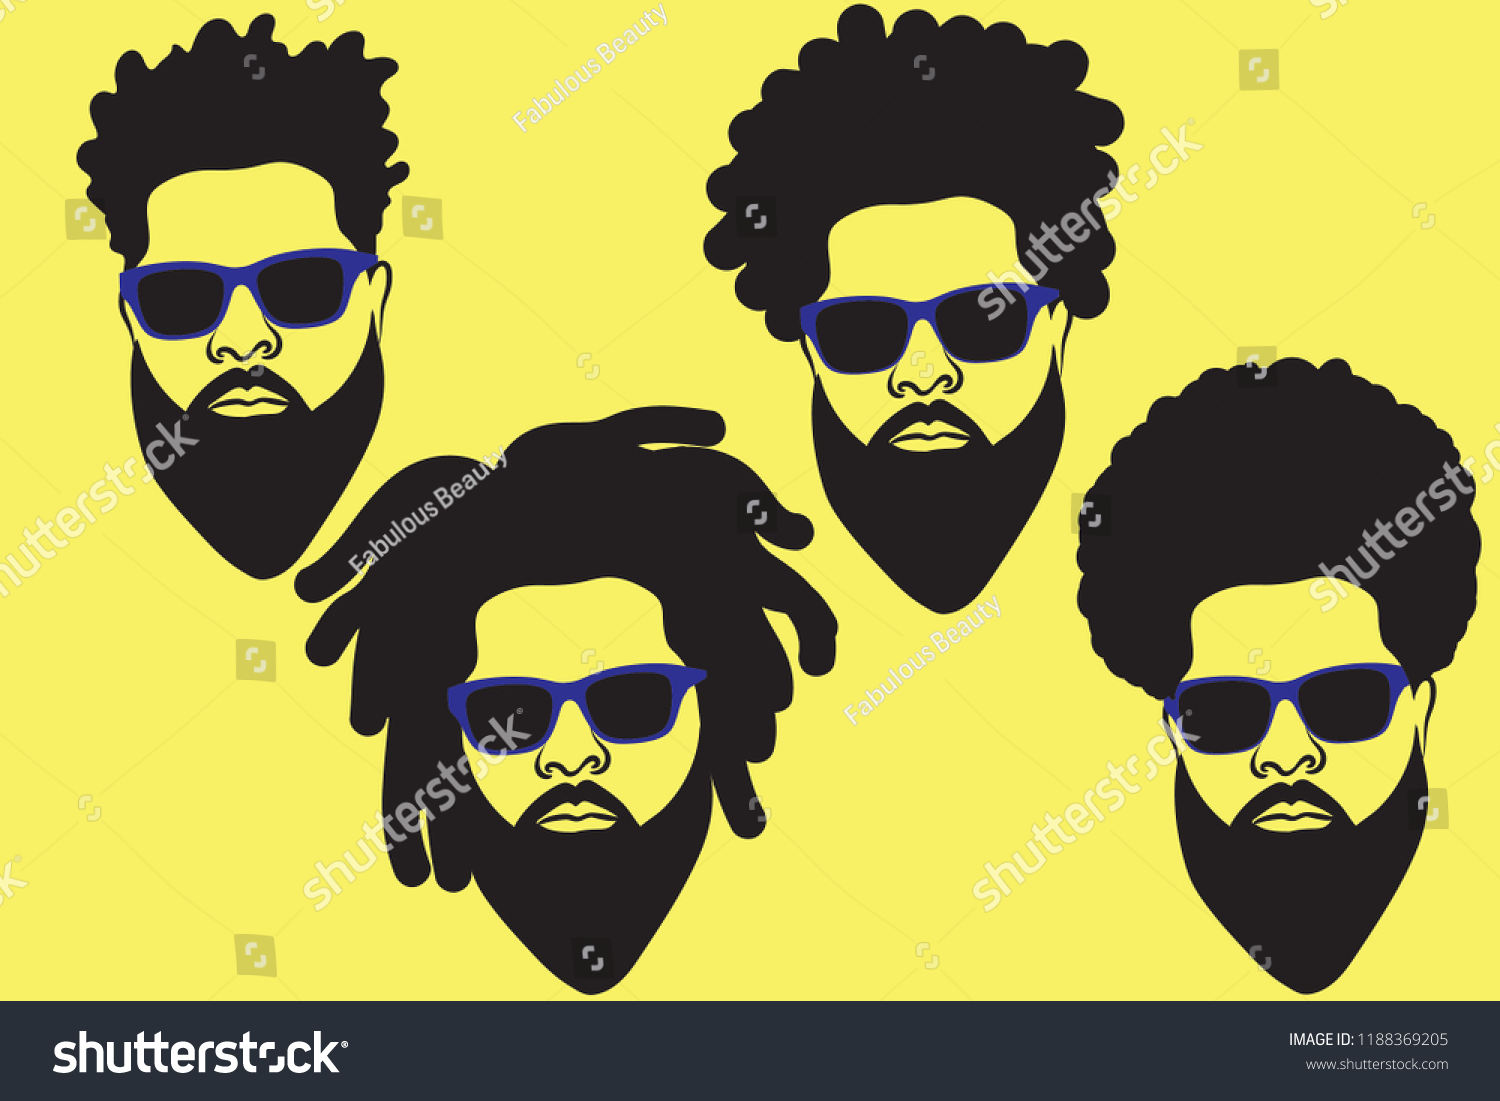 SVG of Black man with an afro and sunglasses svg